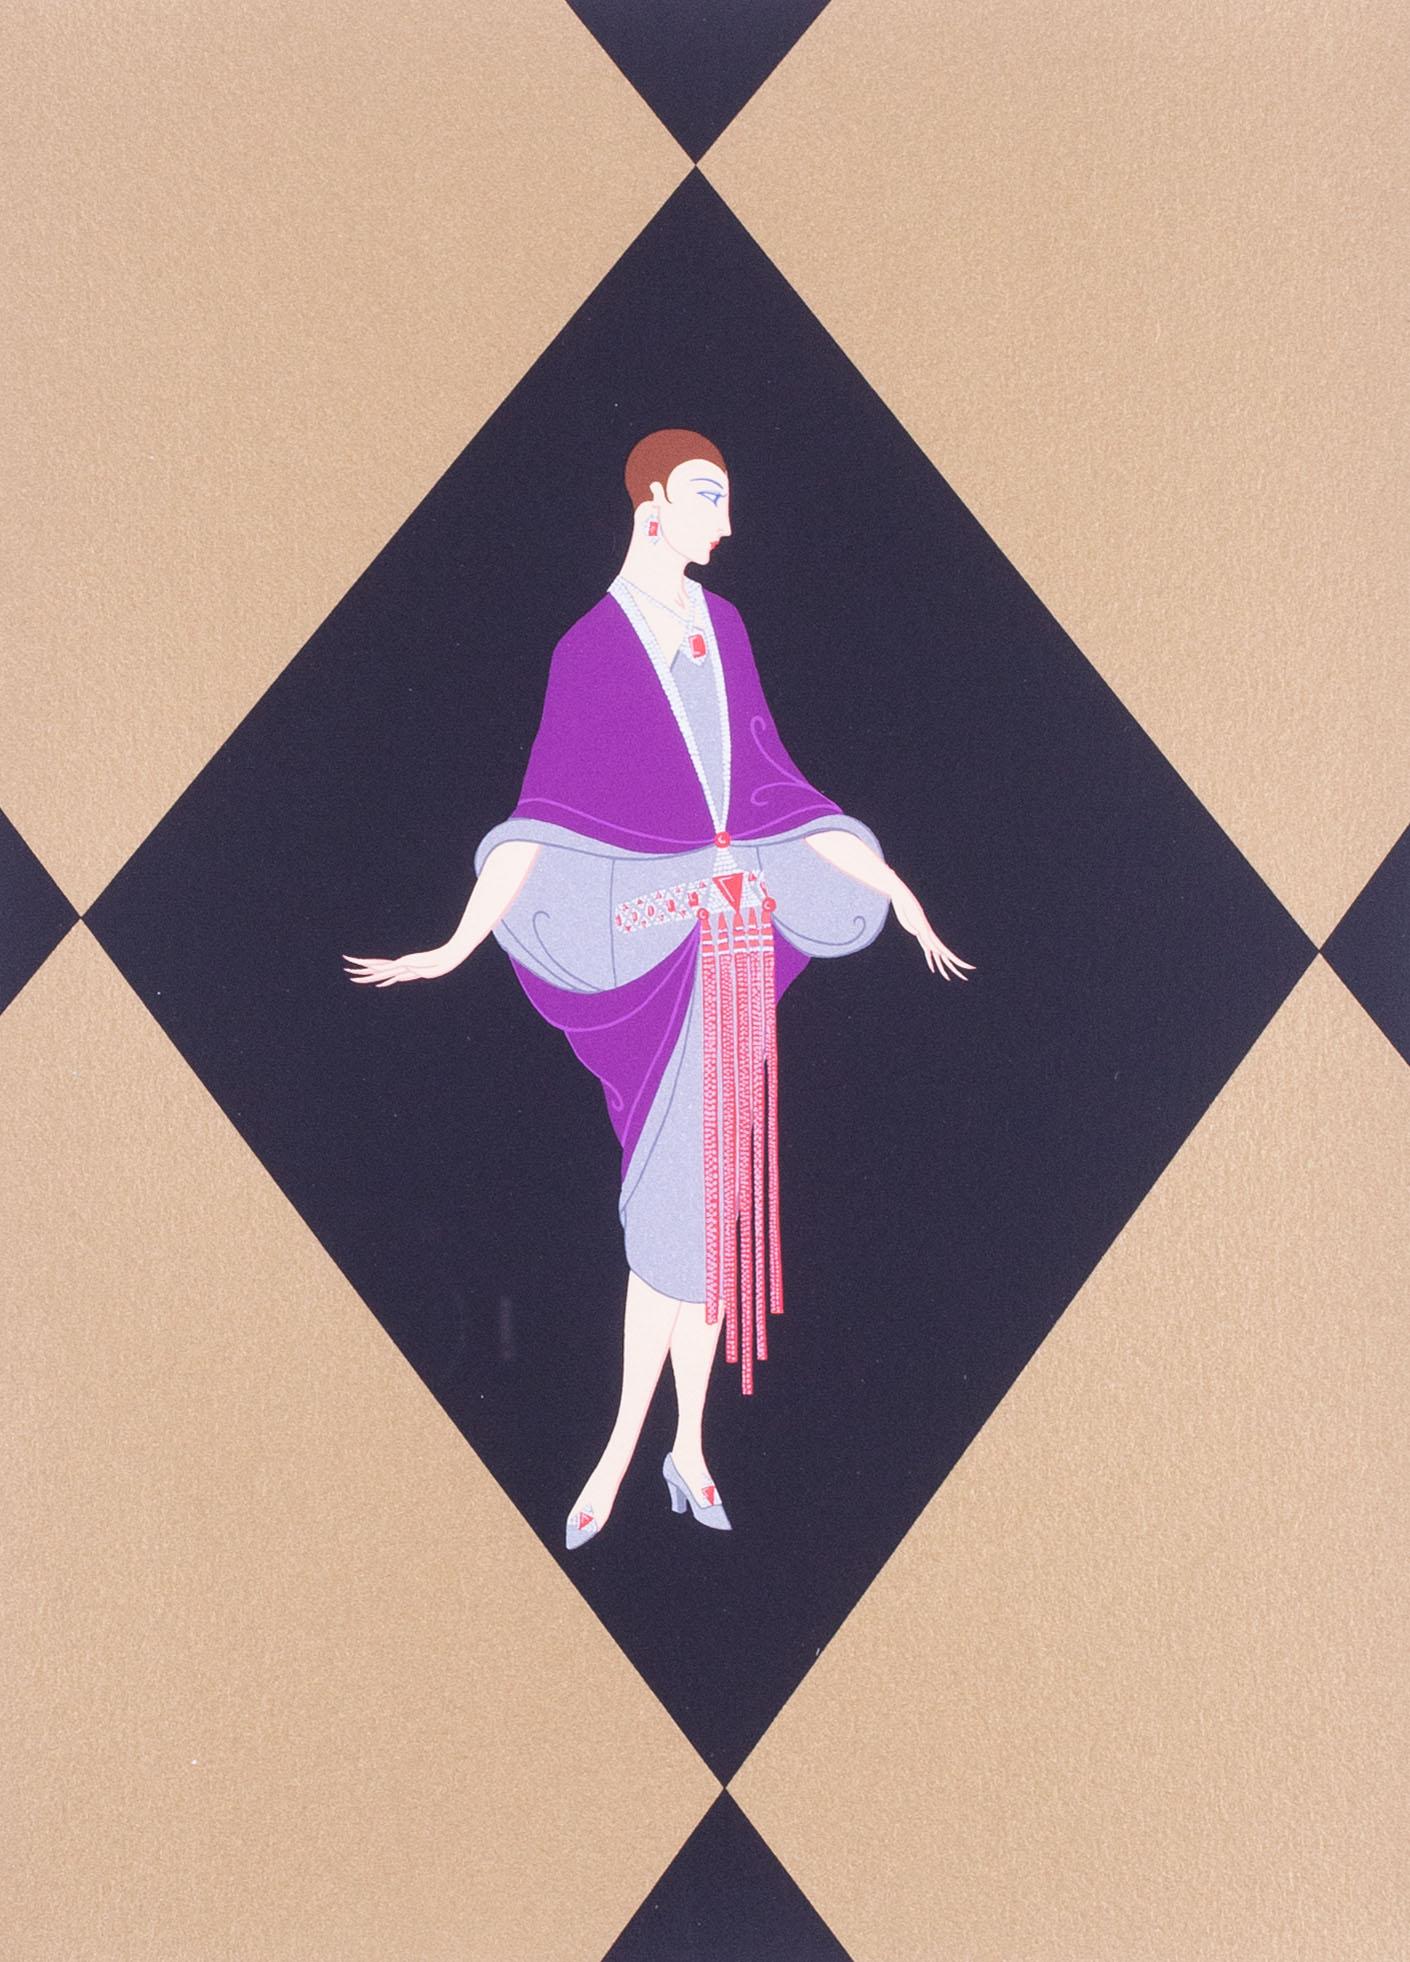 Signed Art Deco lithograph by Erte, Manhattan Mary III, 1979 - Print by Erté